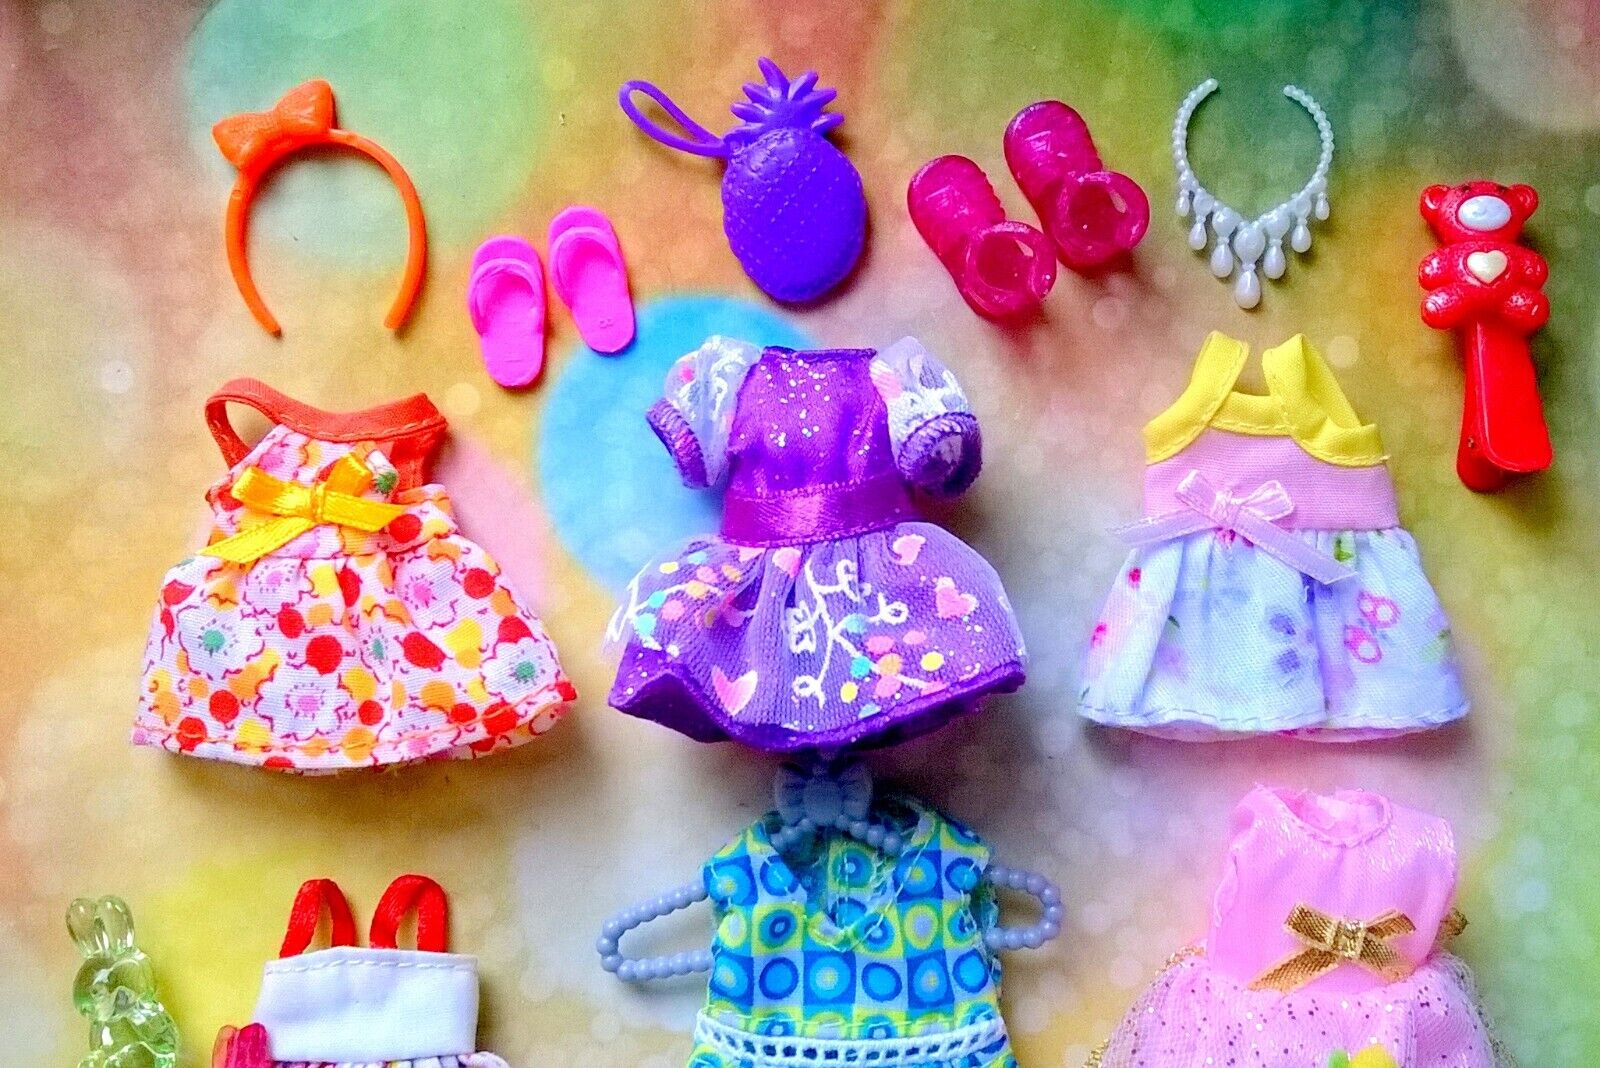 ???Barbie Kelly Chelsea doll clothes, accessories with shoes #E???